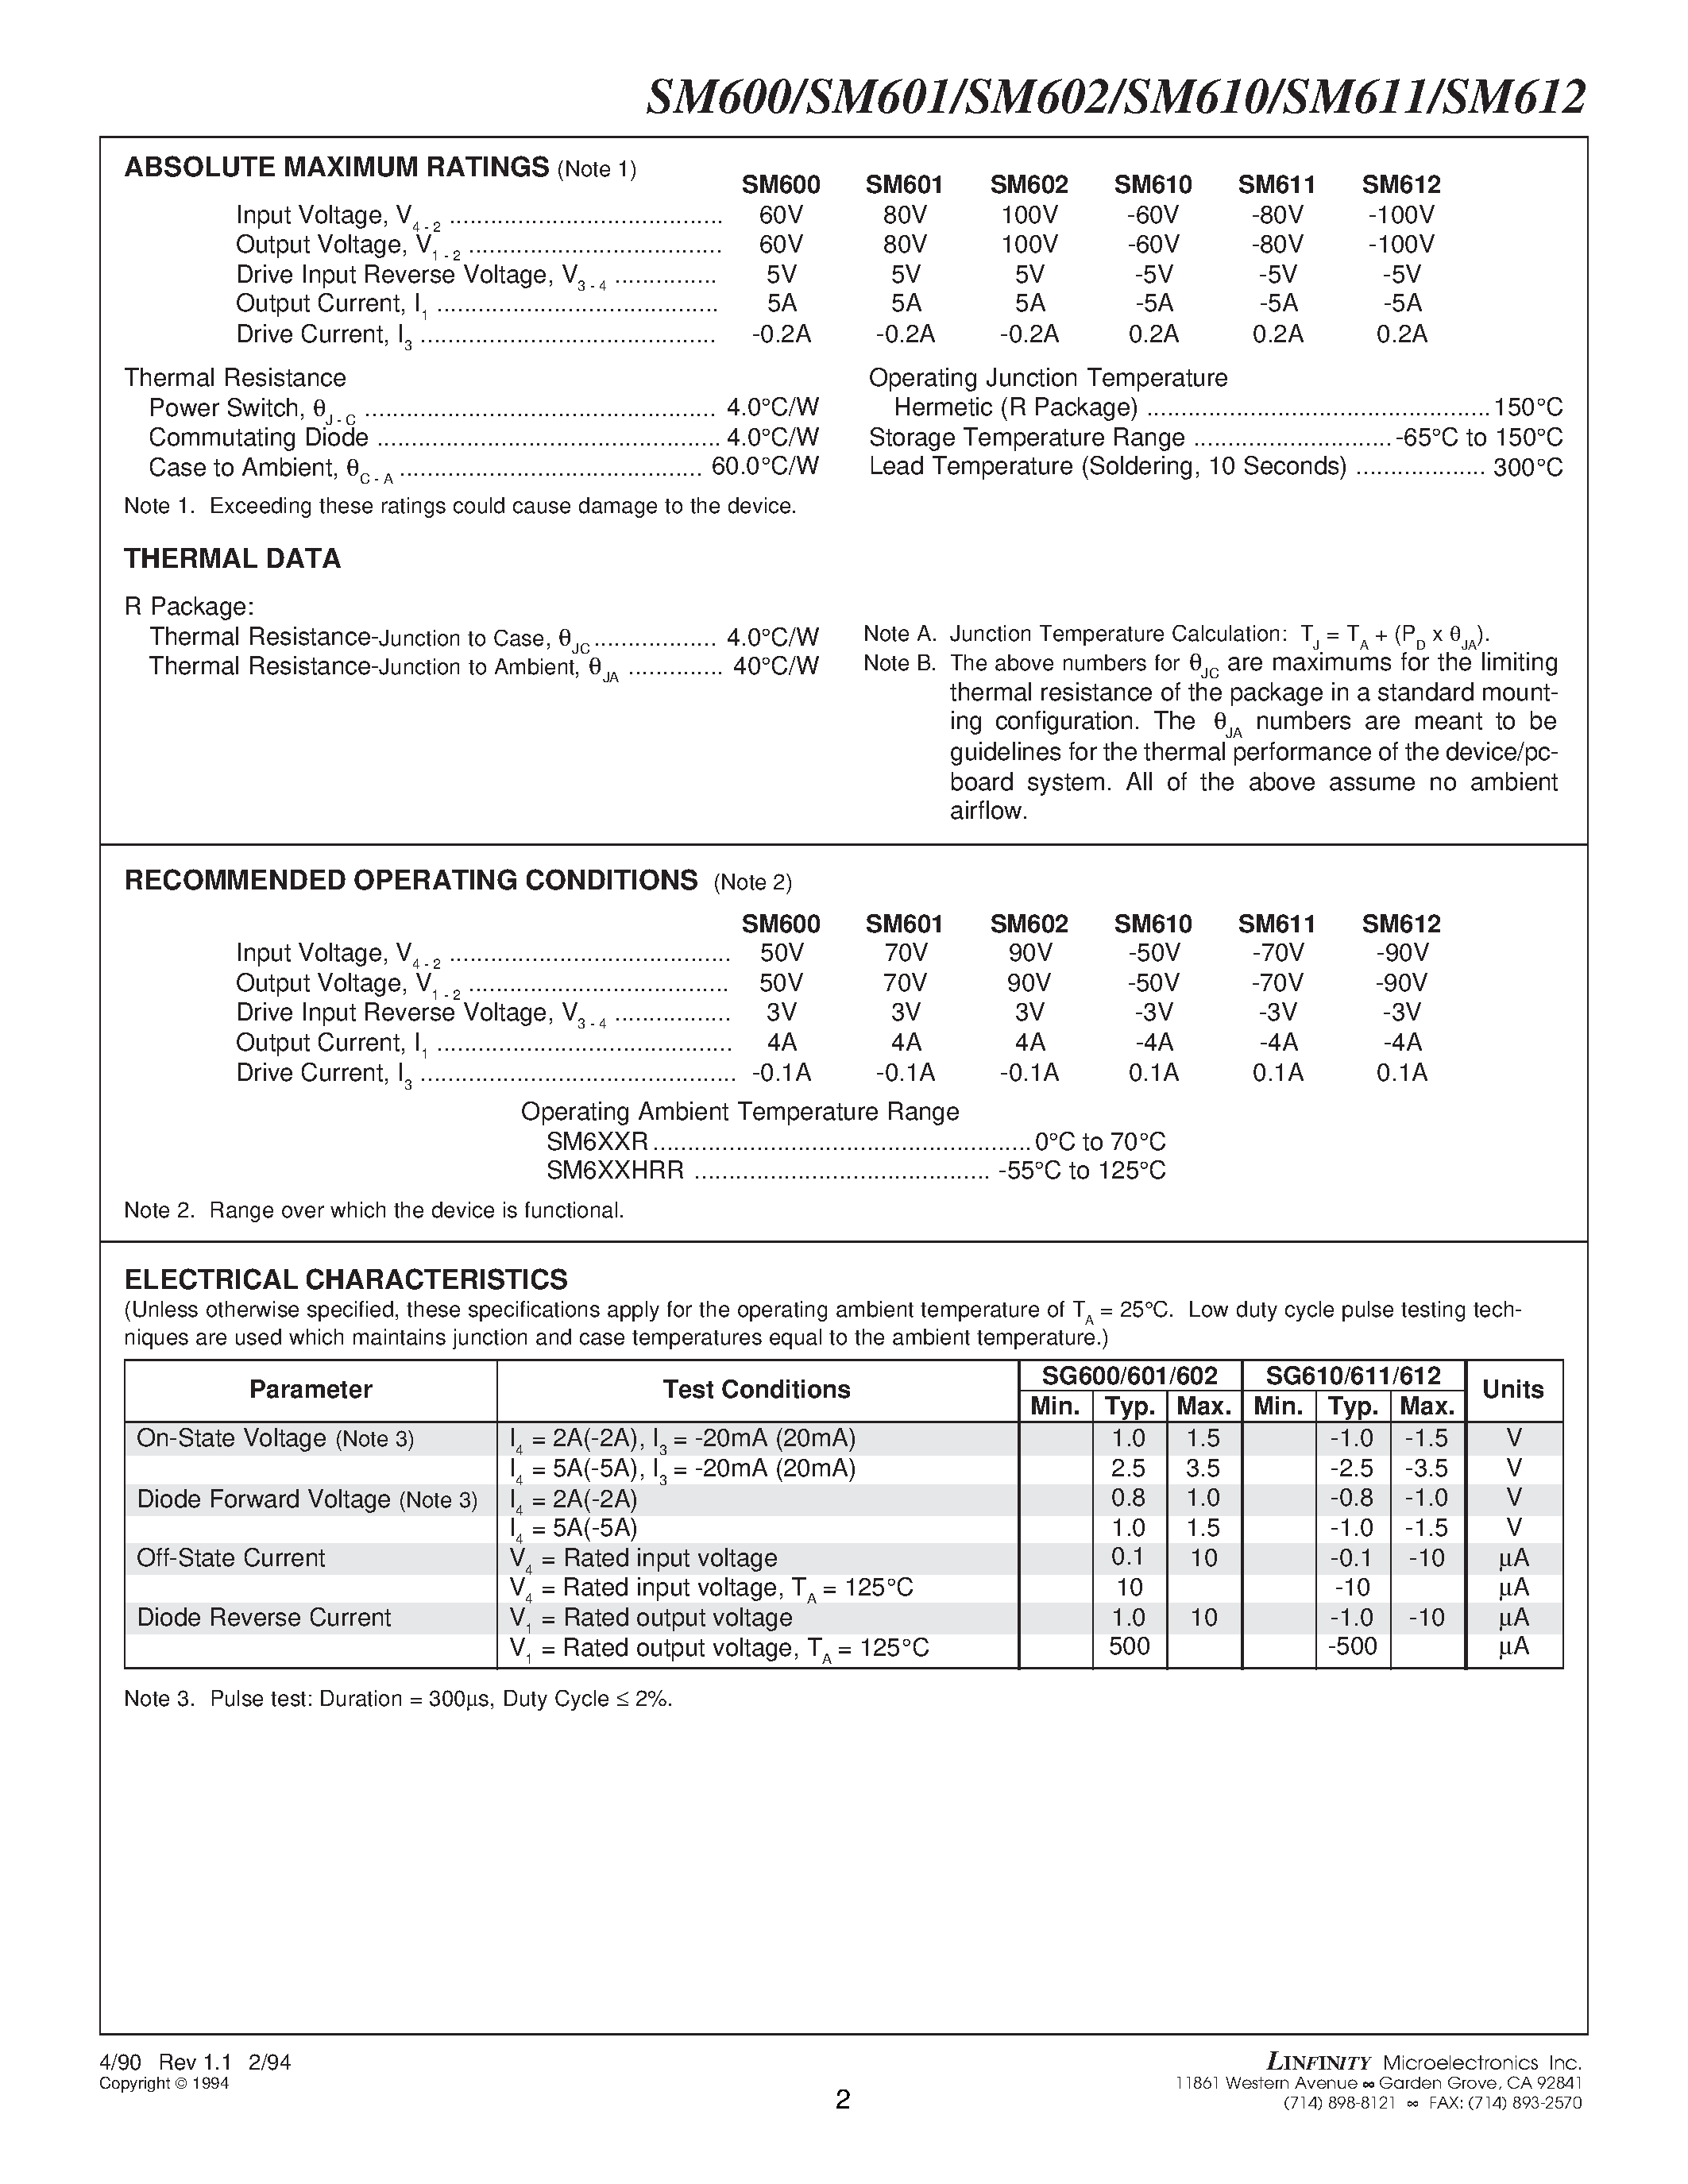 Datasheet SM600 - (SM600 - SM612) SWITCHING REGULATOR POWER OUTPUT STAGES page 2